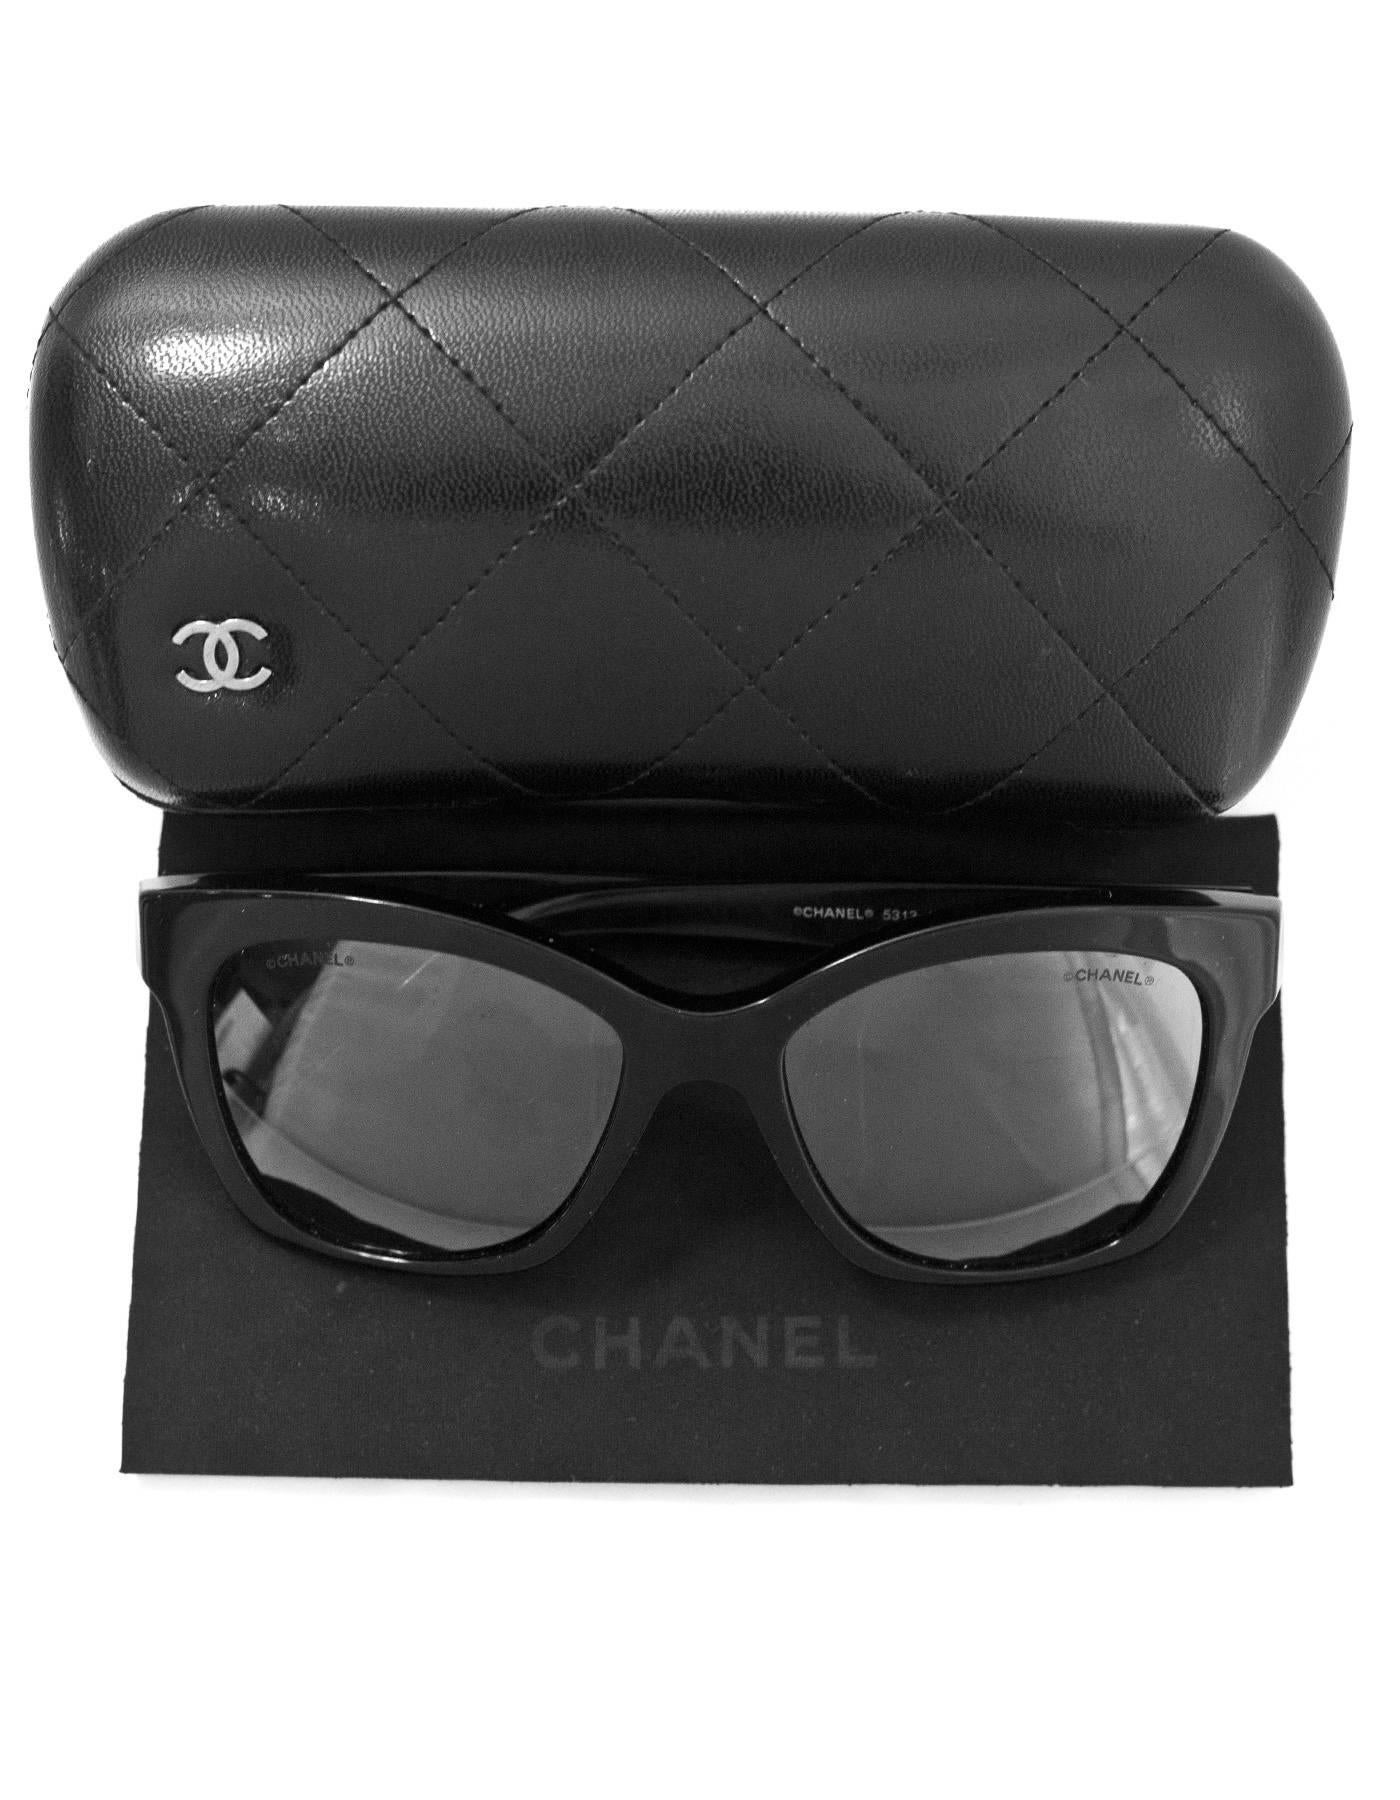 Women's Chanel Black Pantos Spring CC Lego Mirrored Sunglasses with Case